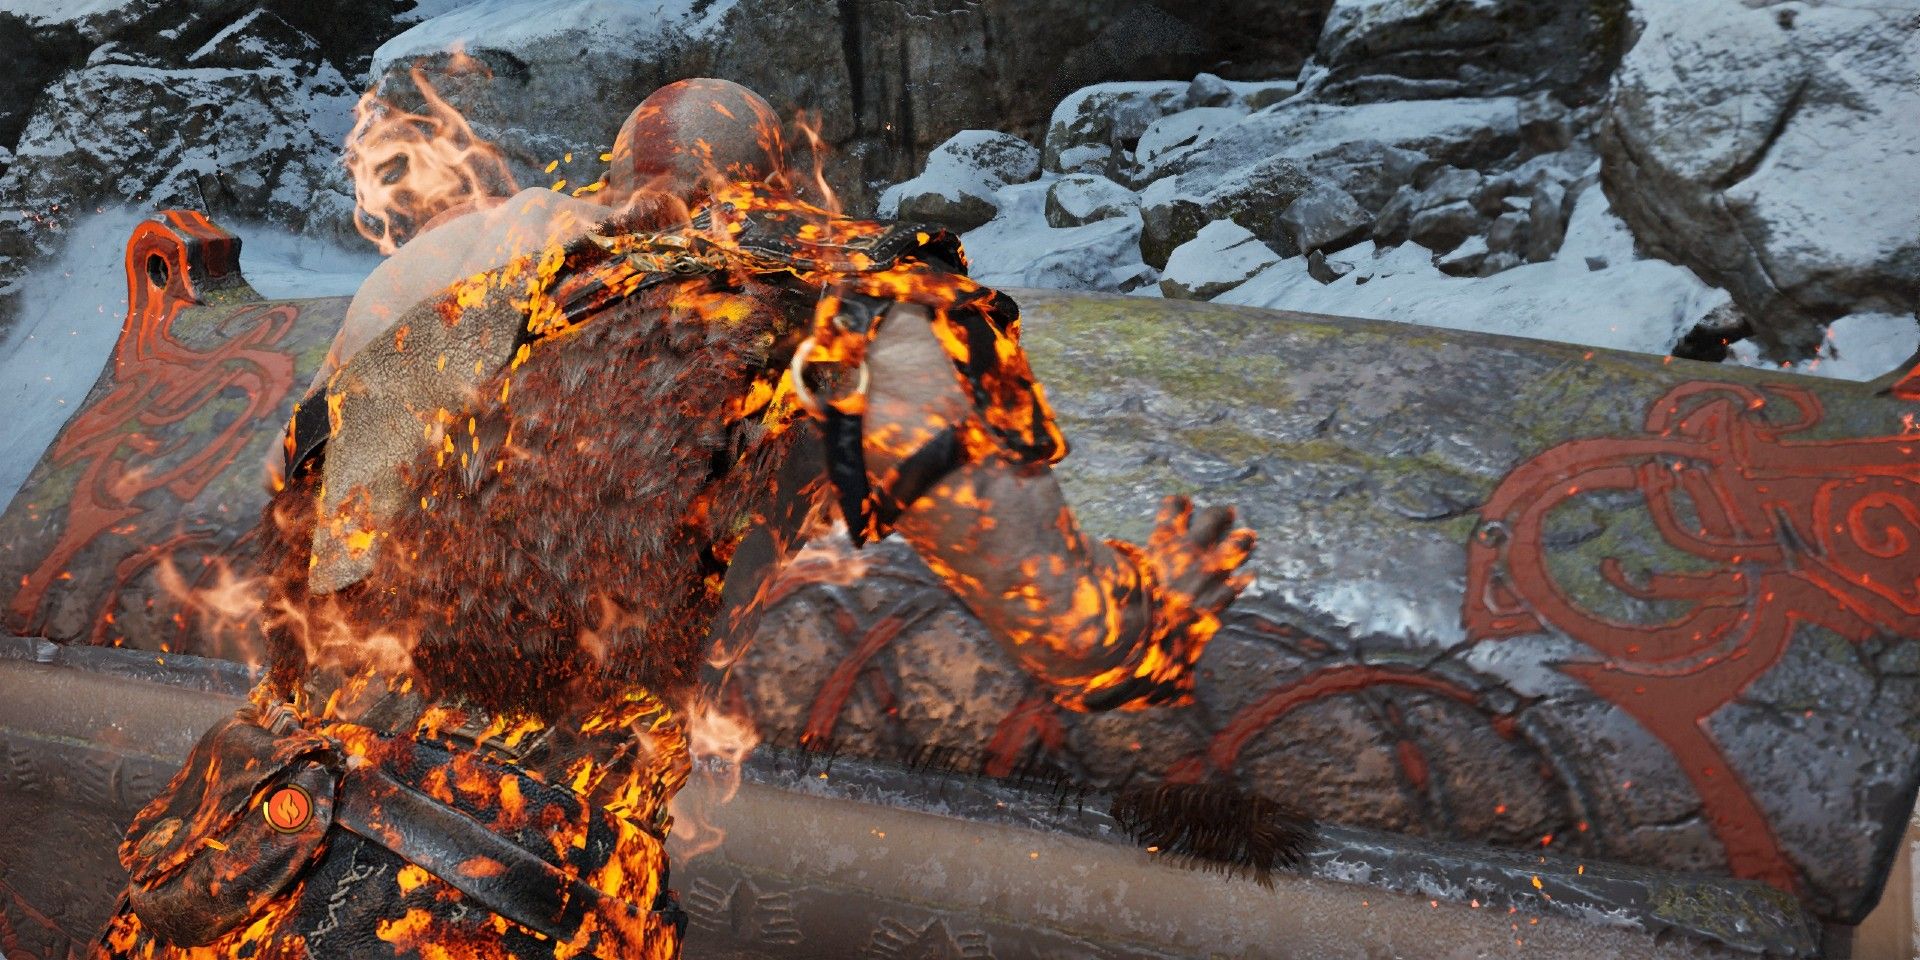 Kratos in God of War consumed by fire and opening a chest at the same time